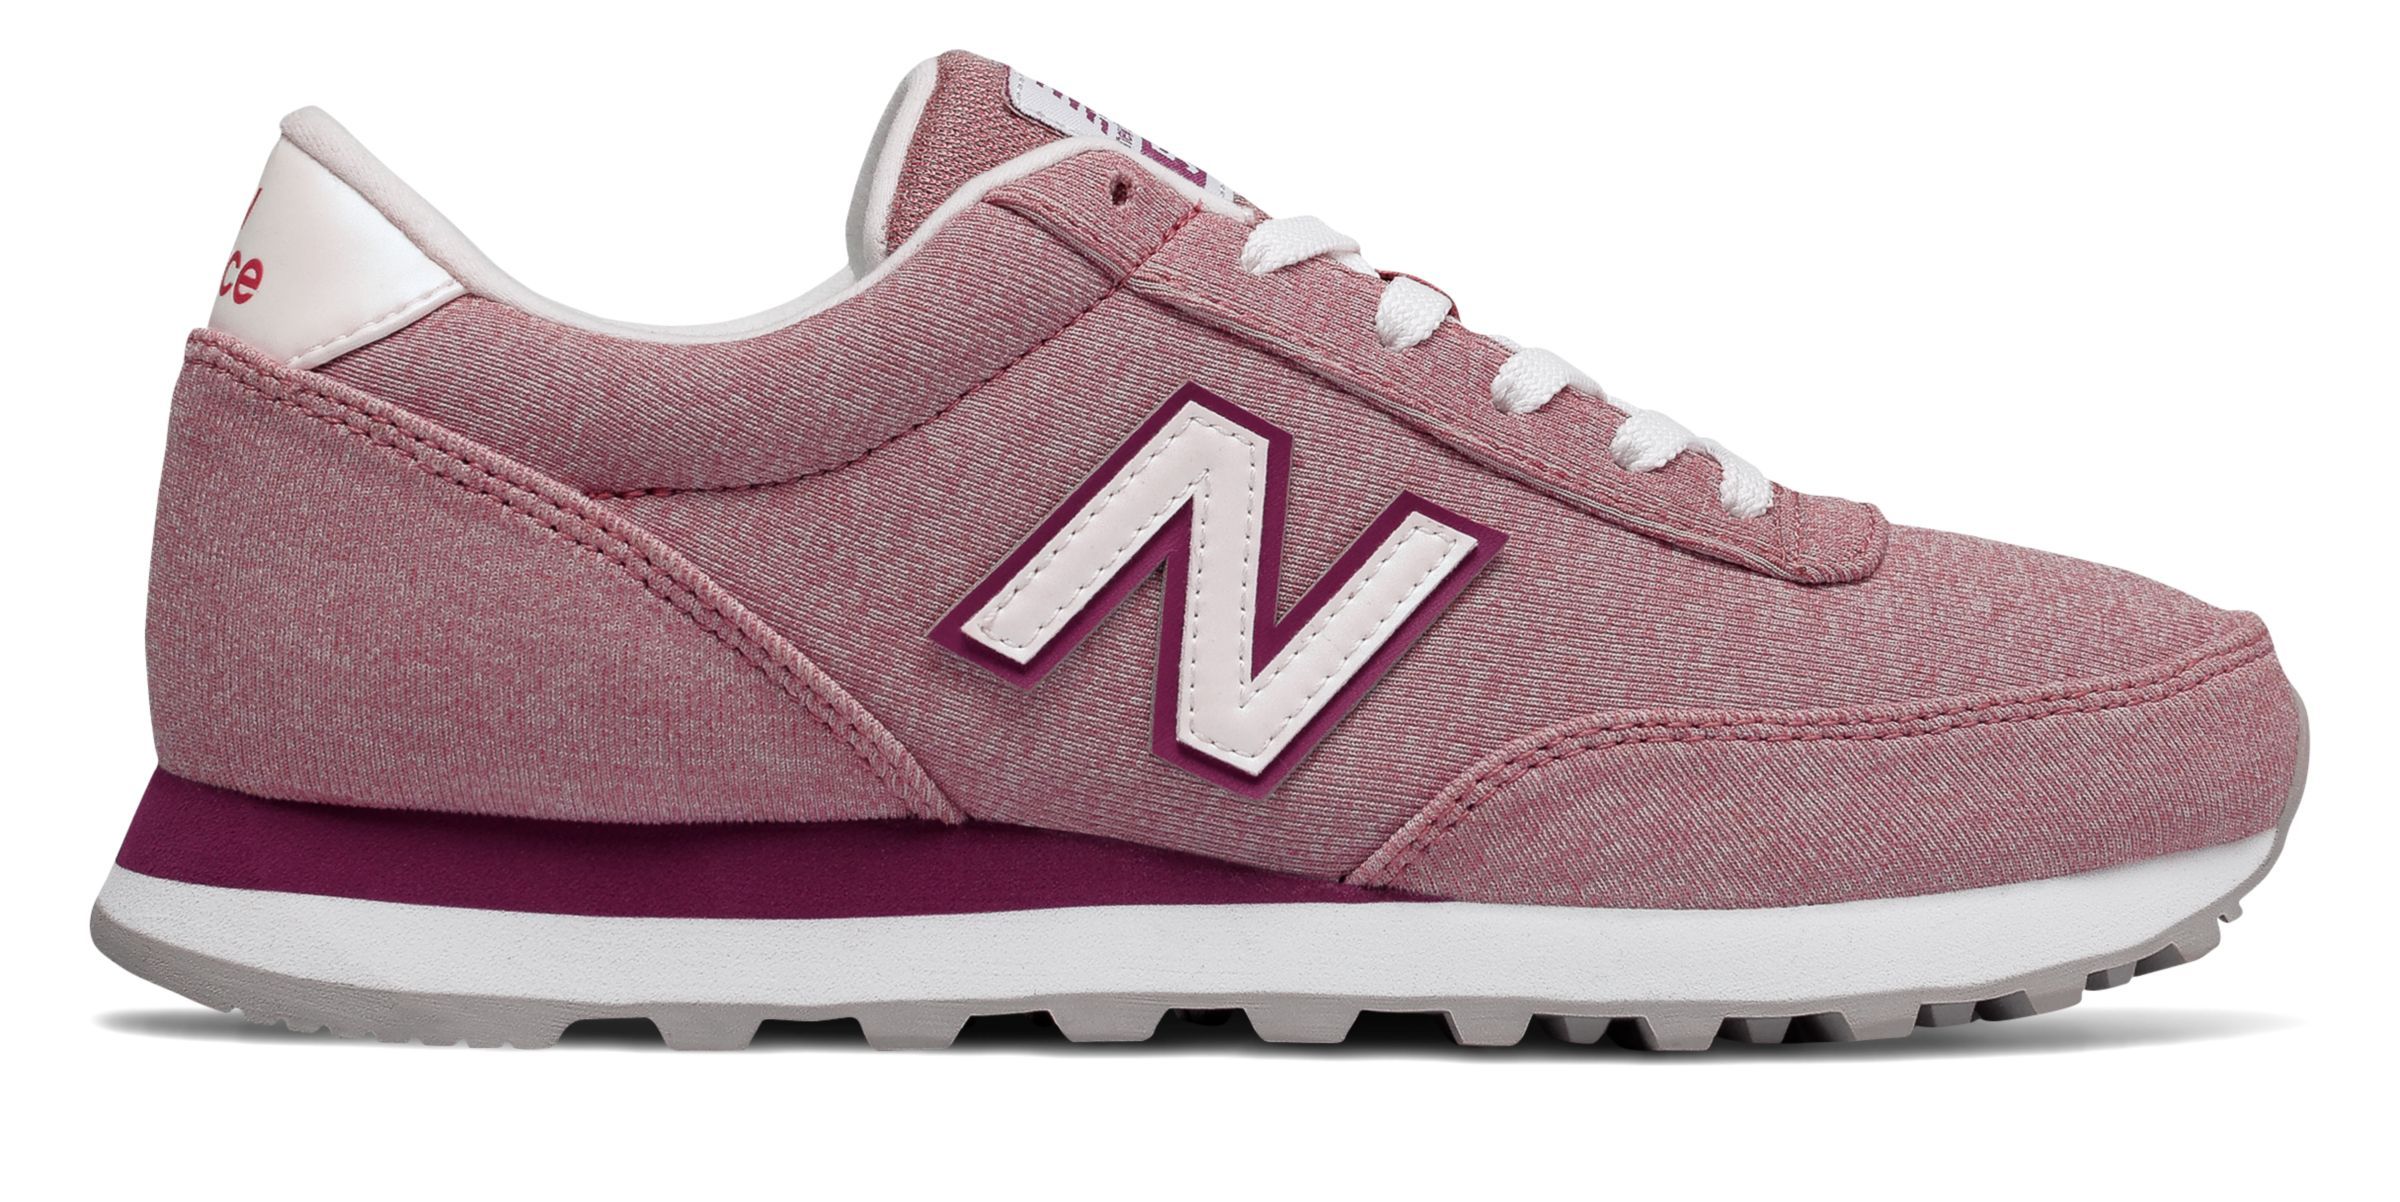 New Balance Women's 501 Textile Shoes Pink | Joes New Balance Outlet